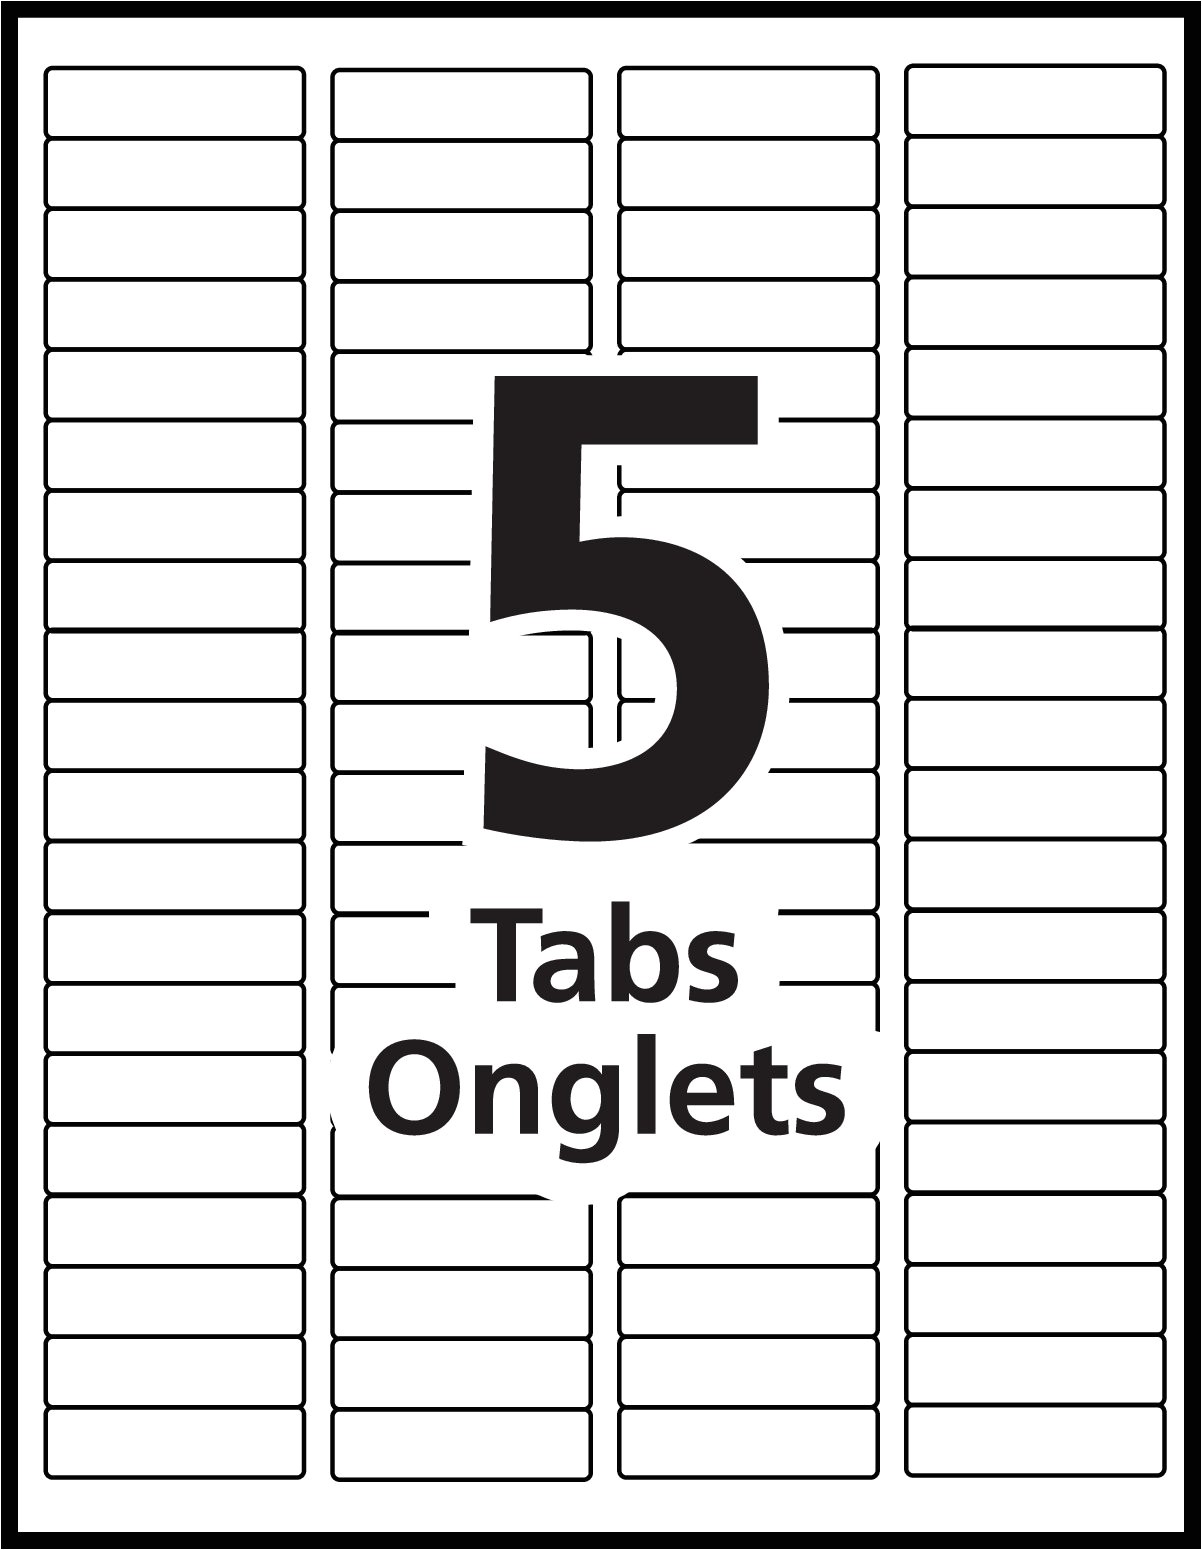 Avery Printable Divider Tabs